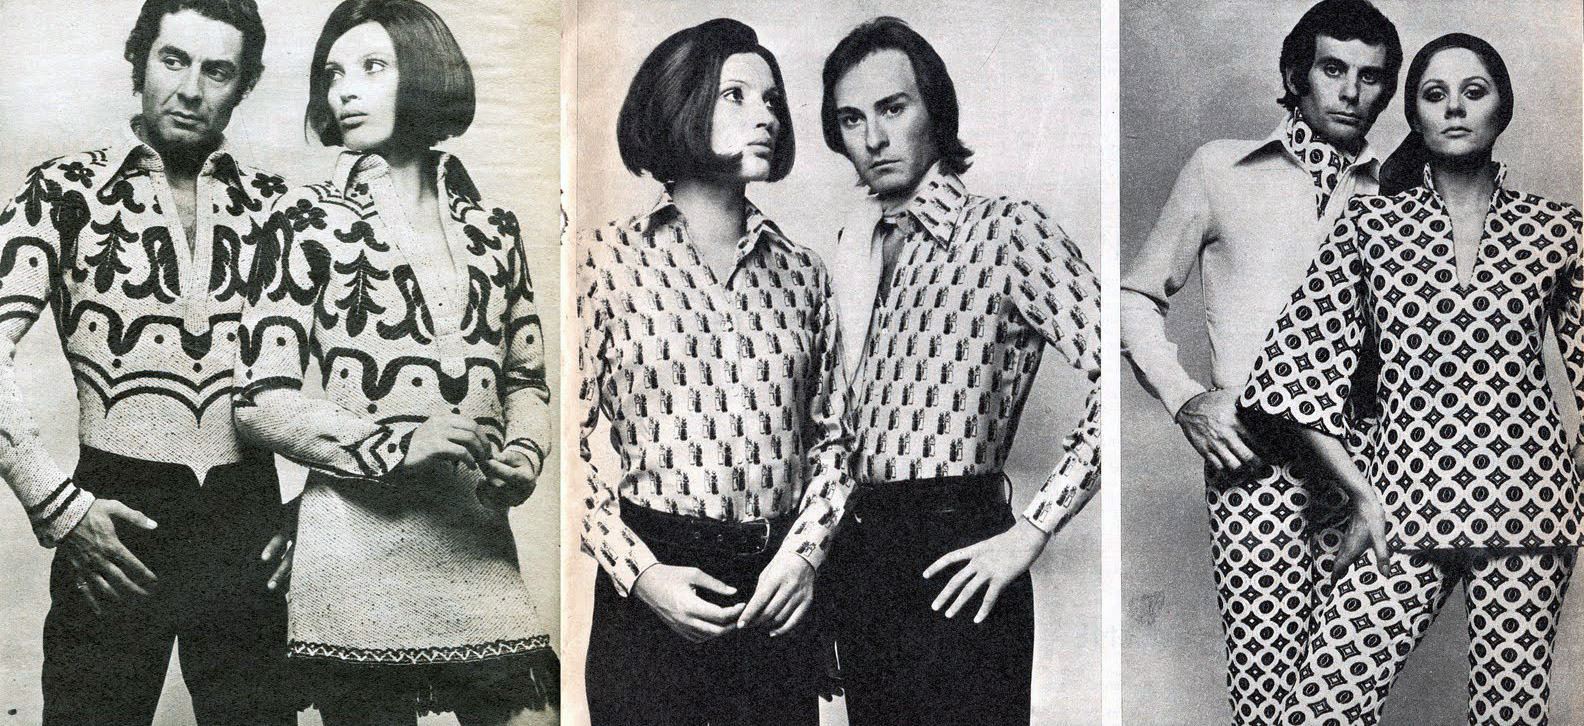 Totally Cringe-worthy Photos Of 1970s His & Hers Fashion